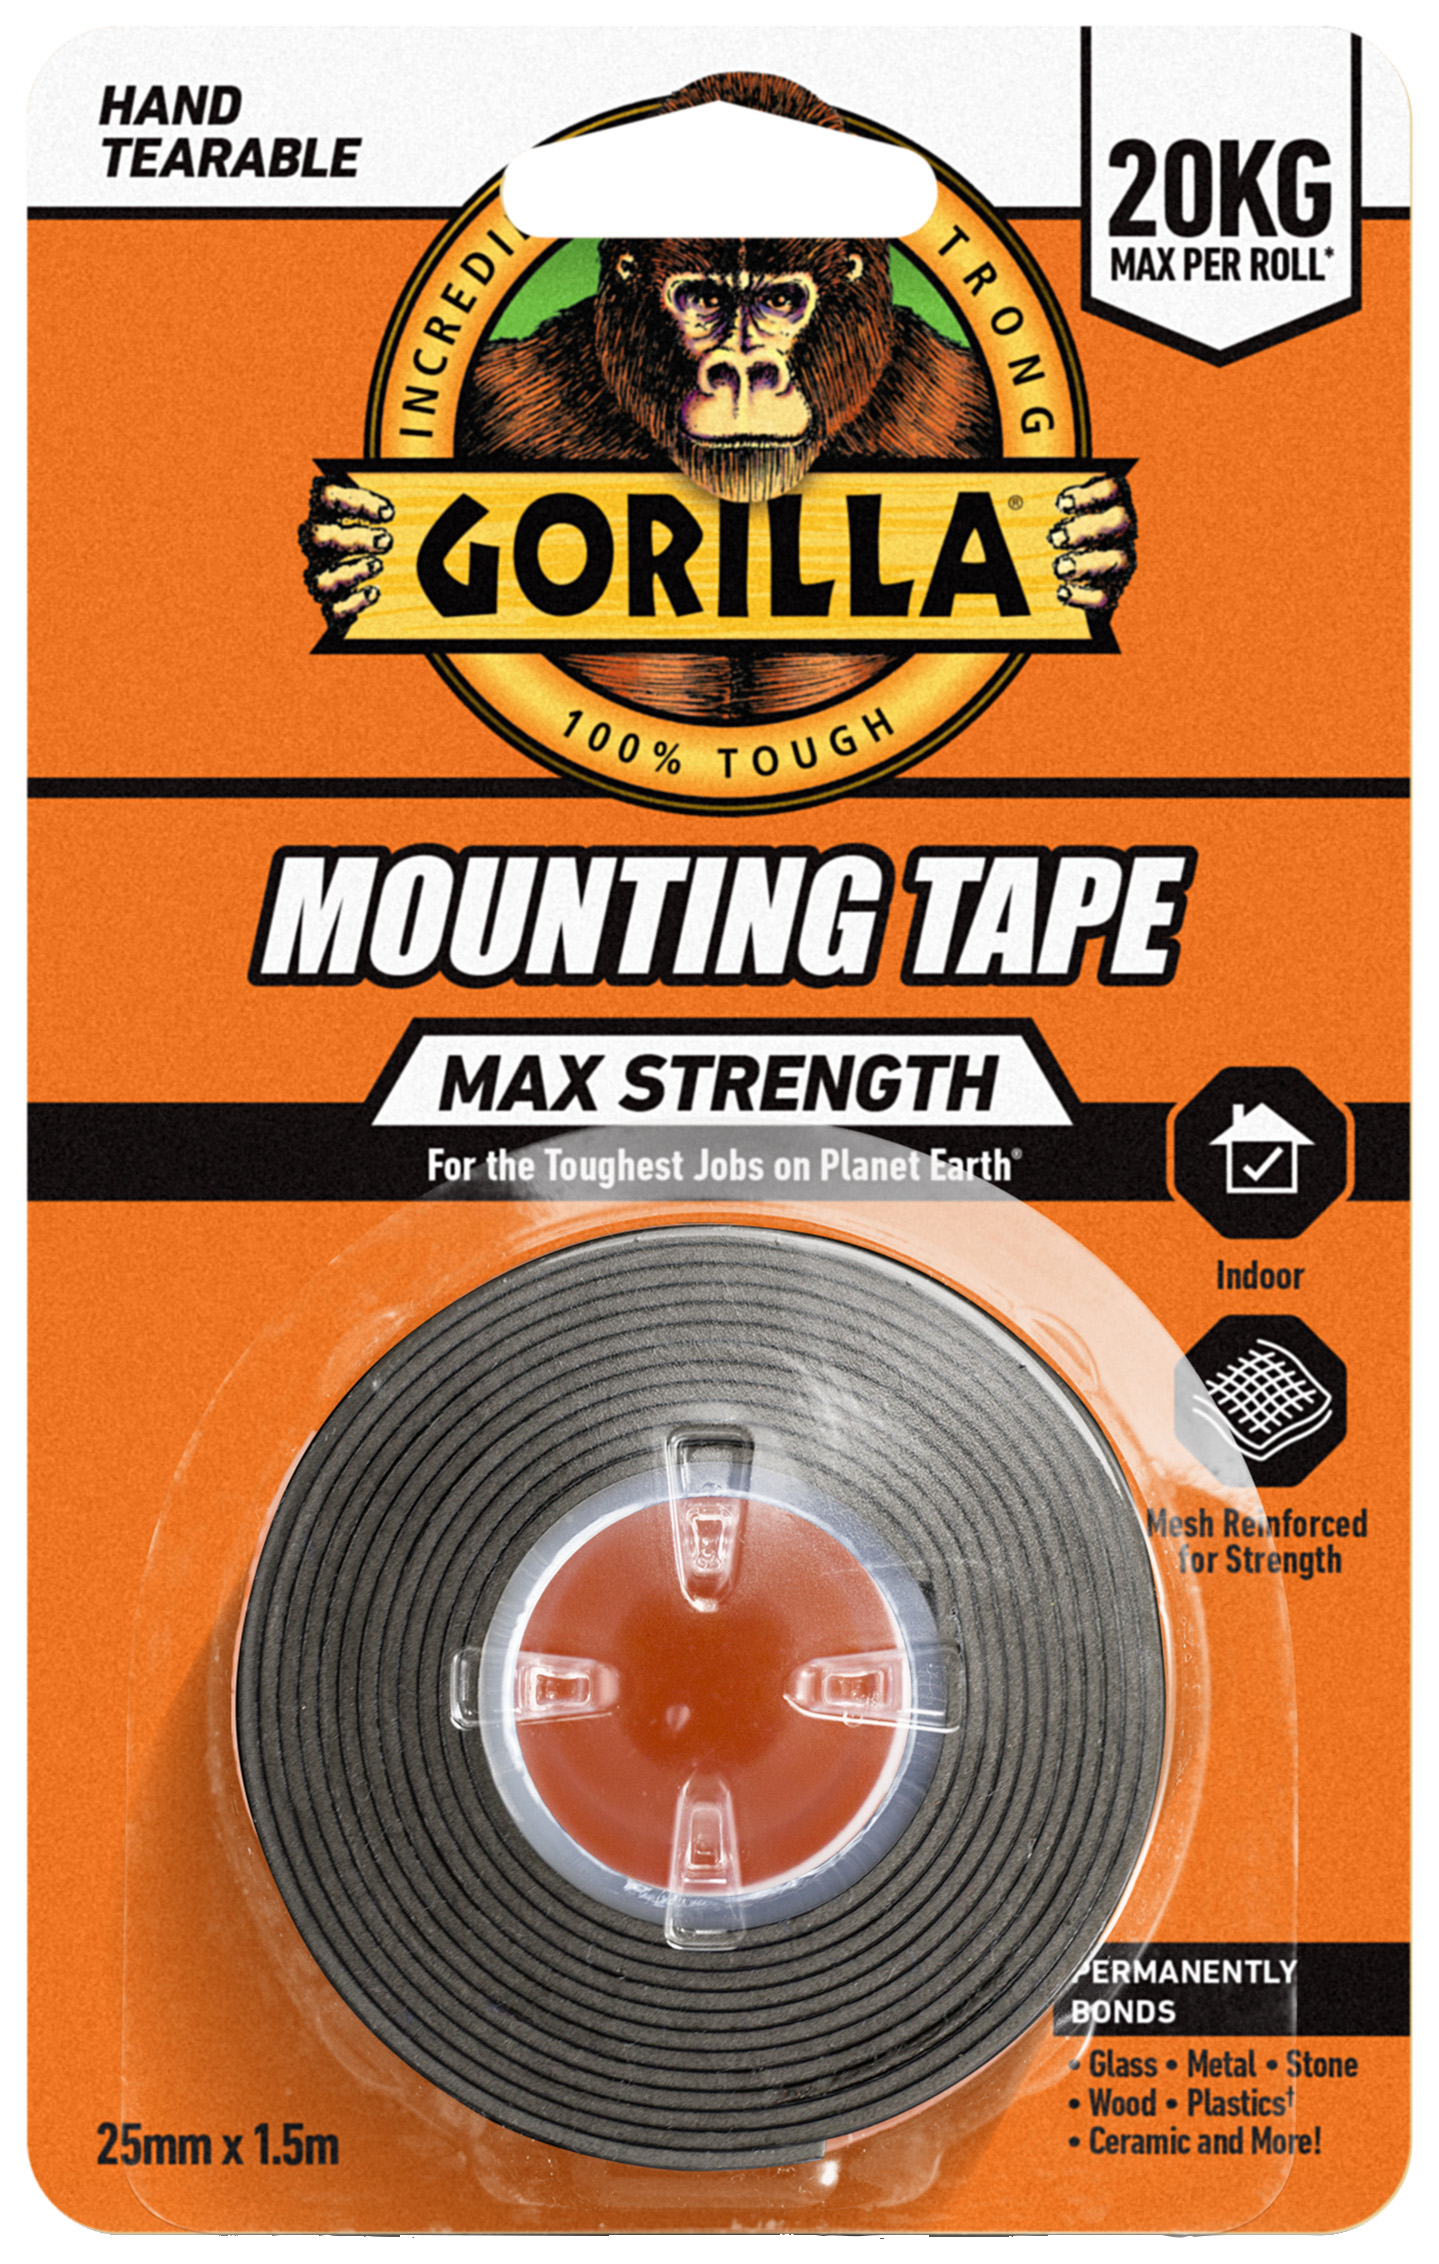 Gorilla Heavy Duty Mounting Tape Max Strength Up to 20kg - 1.5m